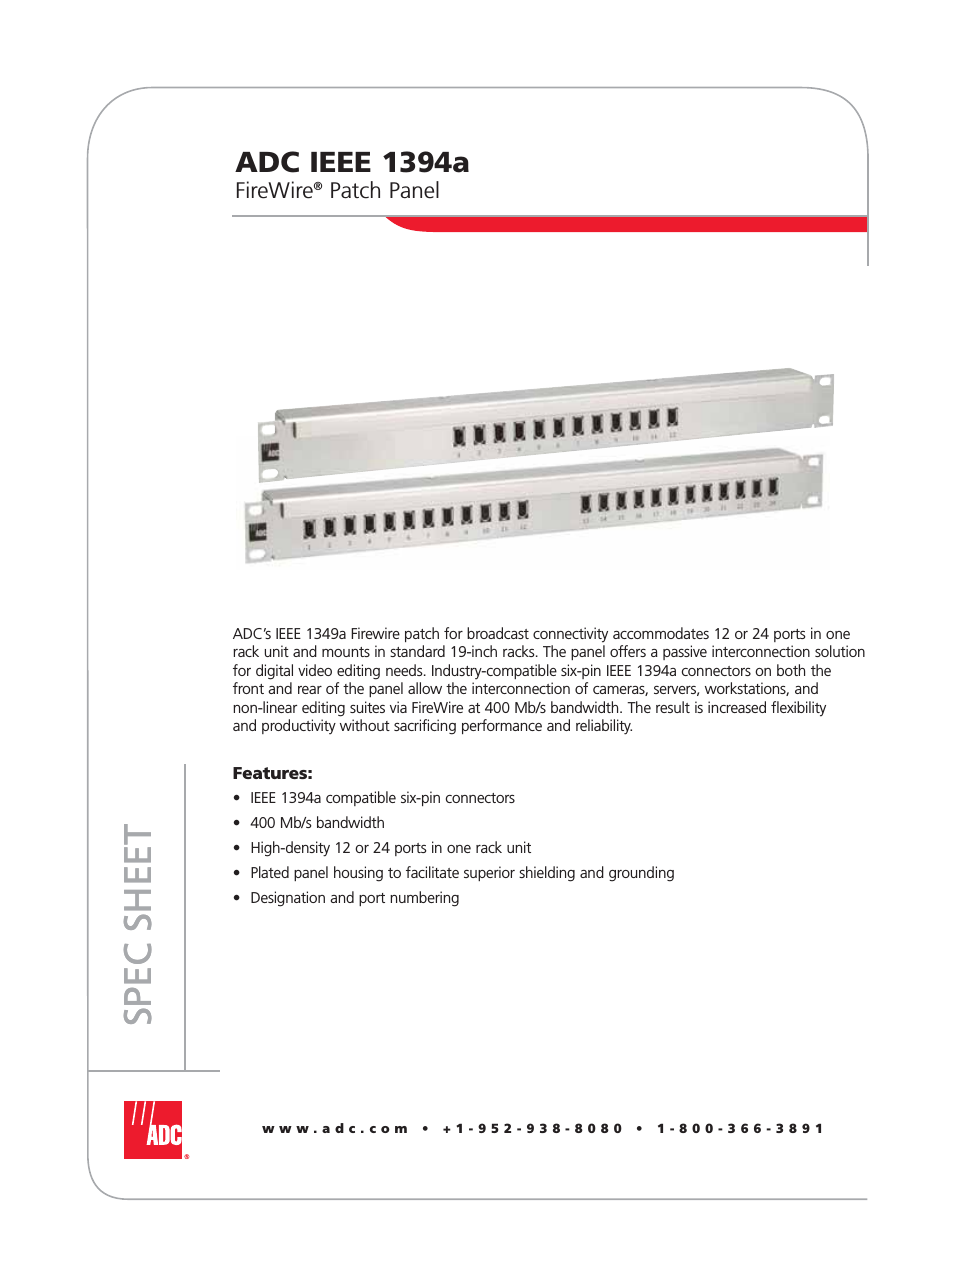 FireWire Patch Panel IEEE 1394a